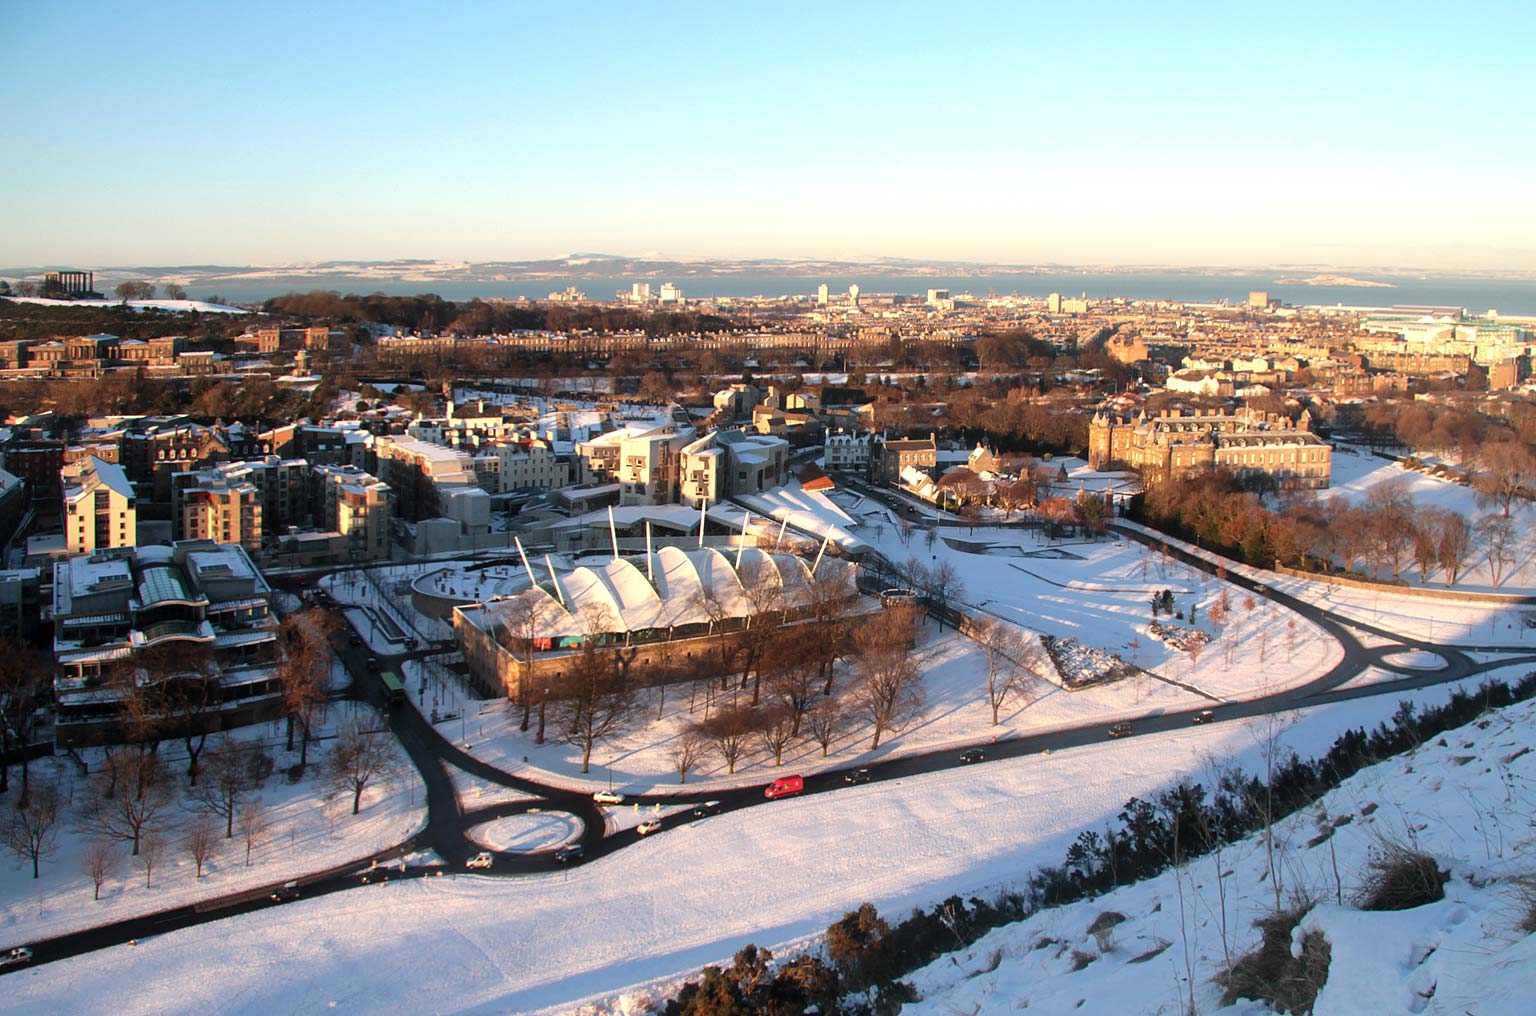 Looking North from The Radical Road in Holyrood Park to Dynamic Earth, The Scottish Parliament and The Palace of Holyrood